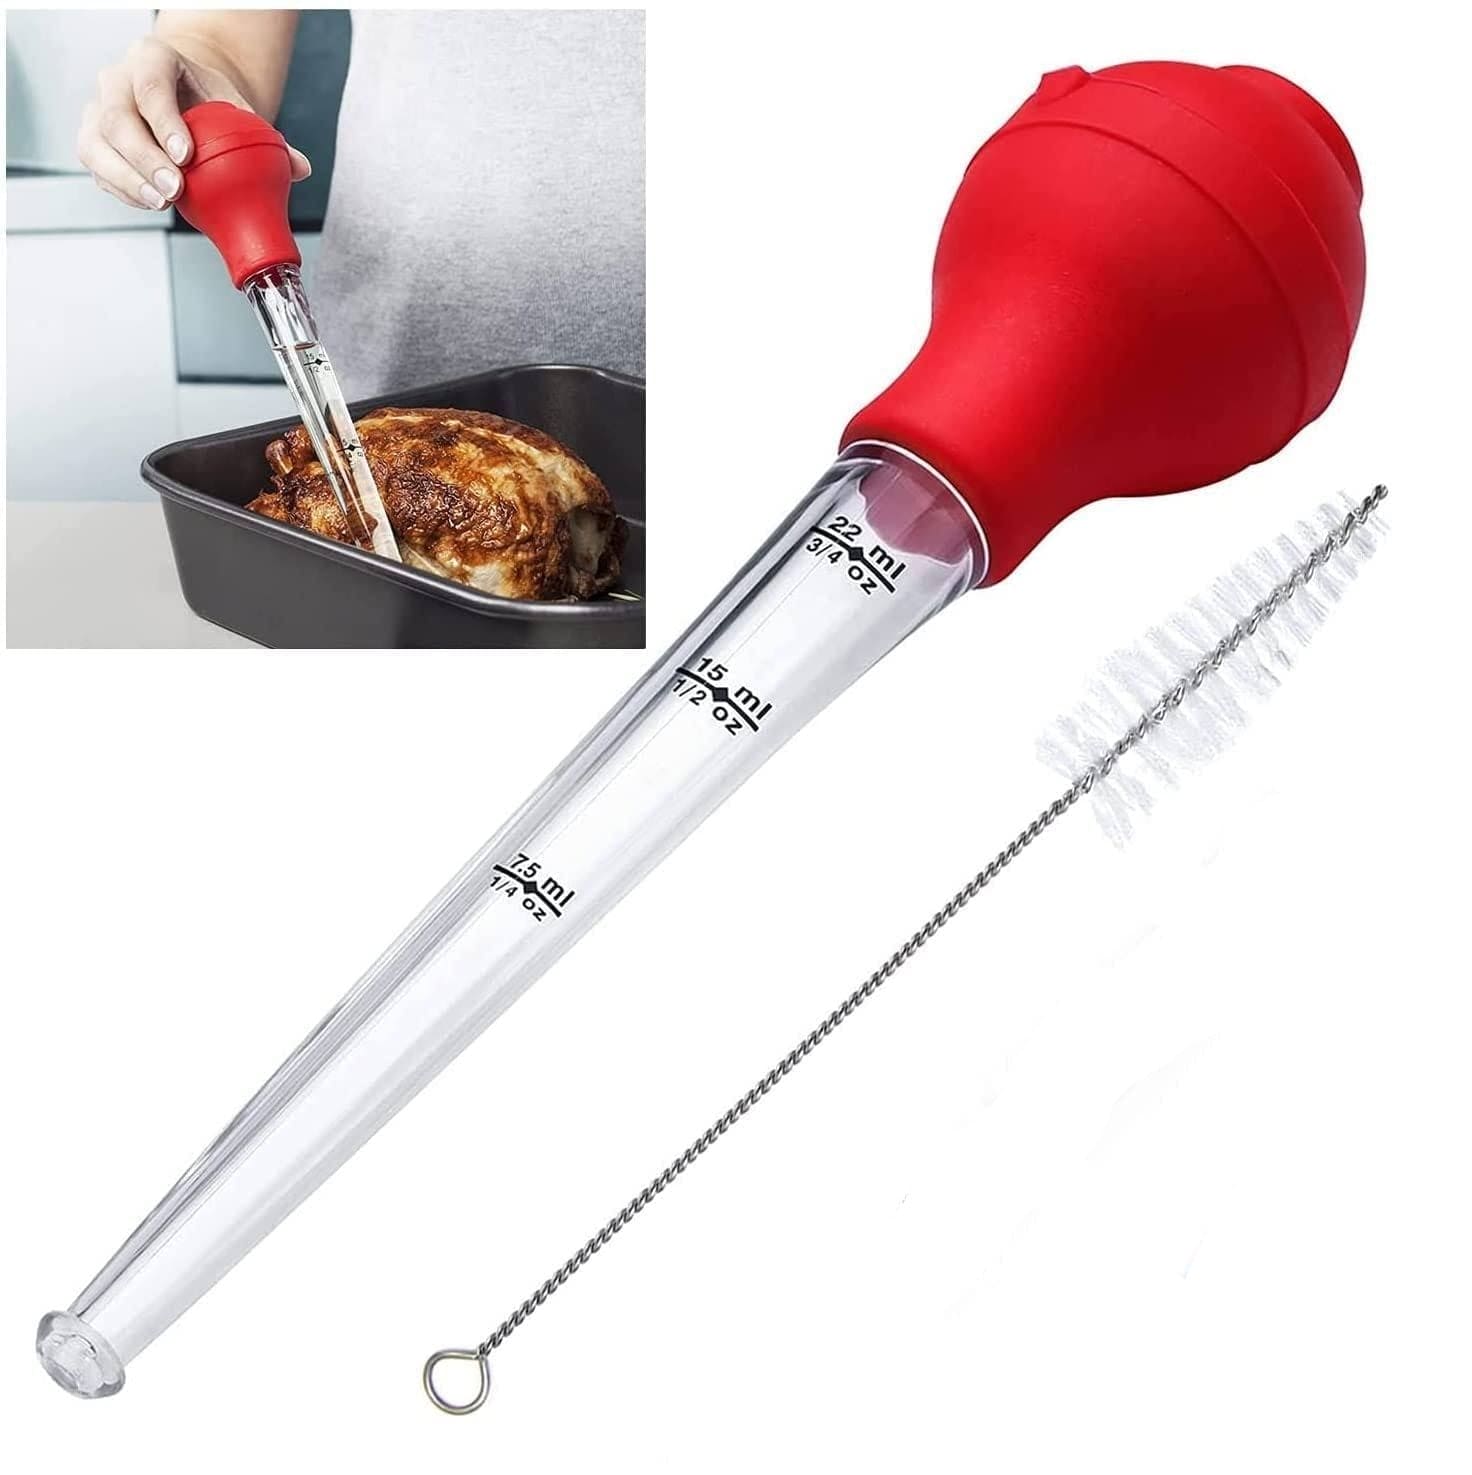 Meat Flavor Injector, Silicon BBQ Baster Syringe, Food Flavor Injector, Meat Marinade Injector, Liquid Drop Dropper, Home Baking Kitchen Tool, Round bulb Baster Syringe